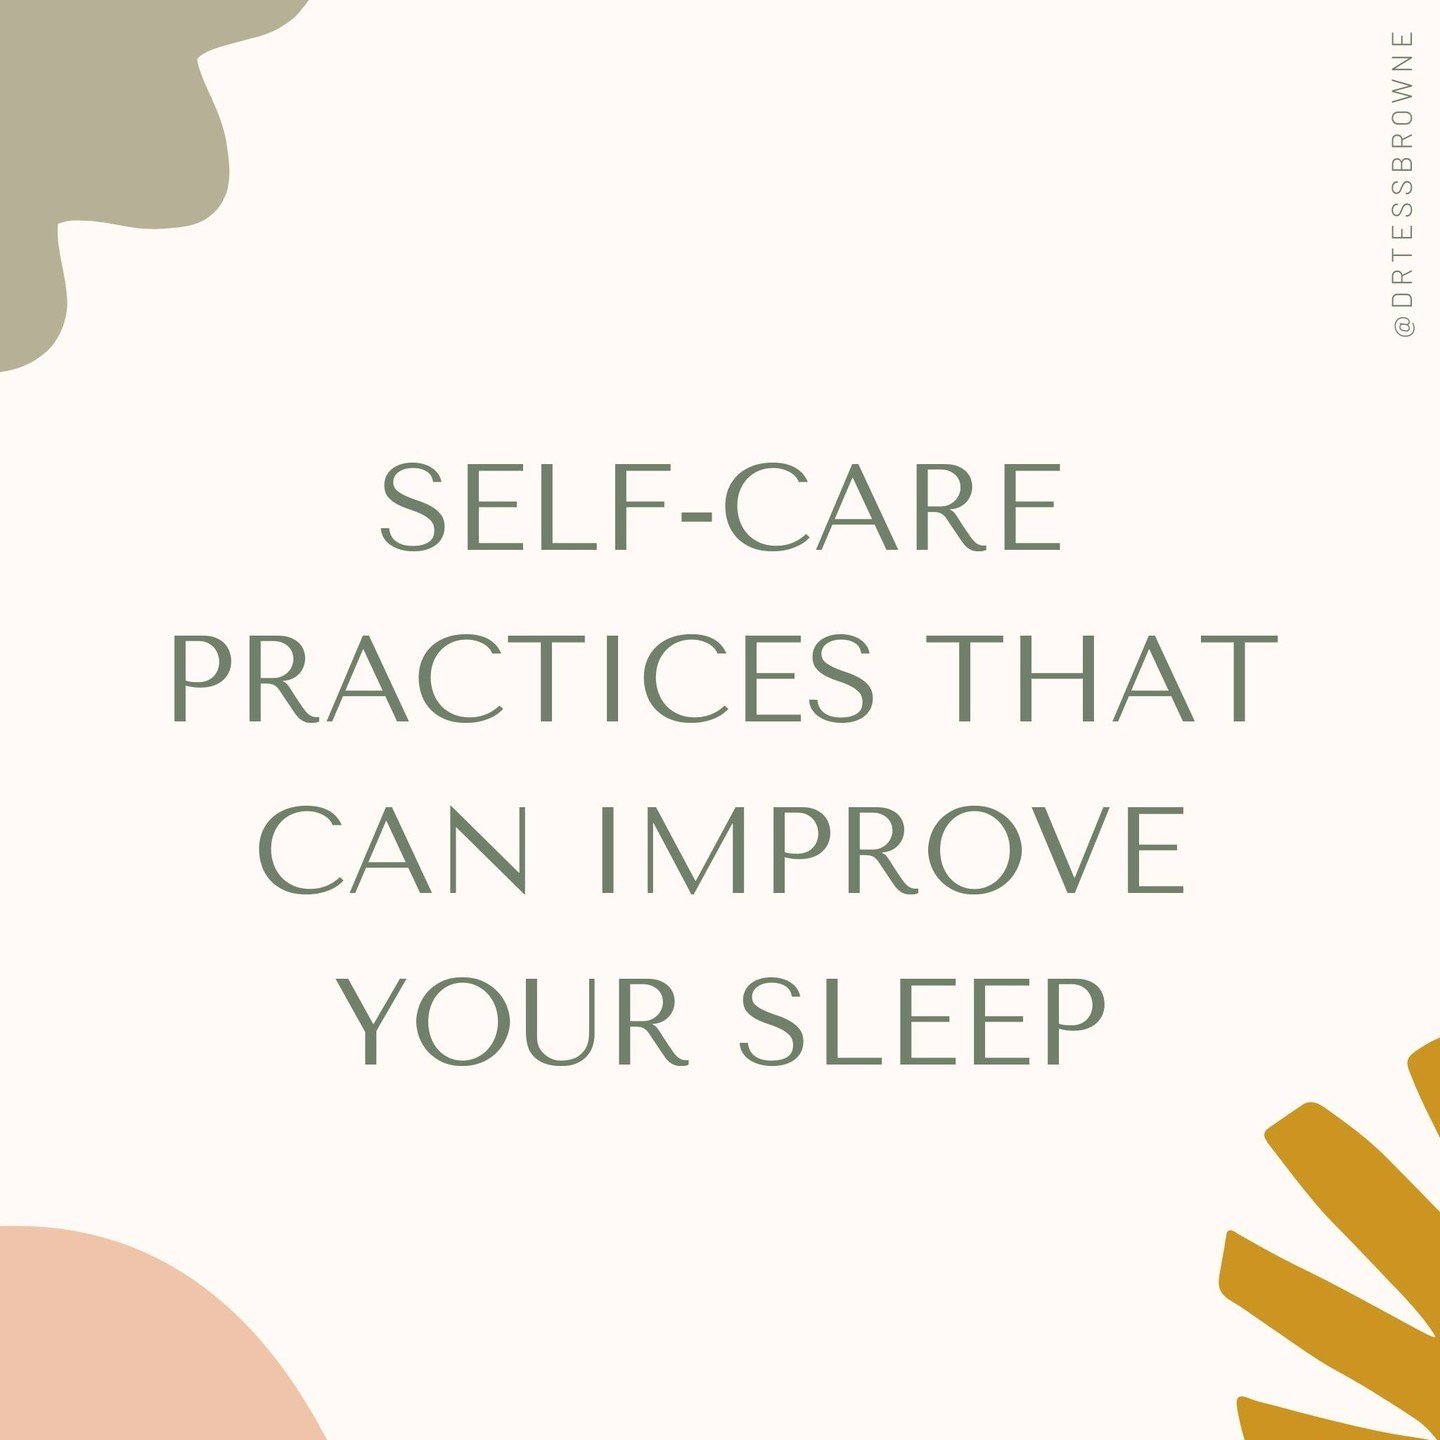 Ready to improve your sleep? ⋒

Here are some simple sleep hygiene strategies that will enhance the quality and quantity of your sleep:

01 | Maintain a consistent bedtime. 
 ↳  Sticking to the same sleep and wake times helps your circadian rhythm to